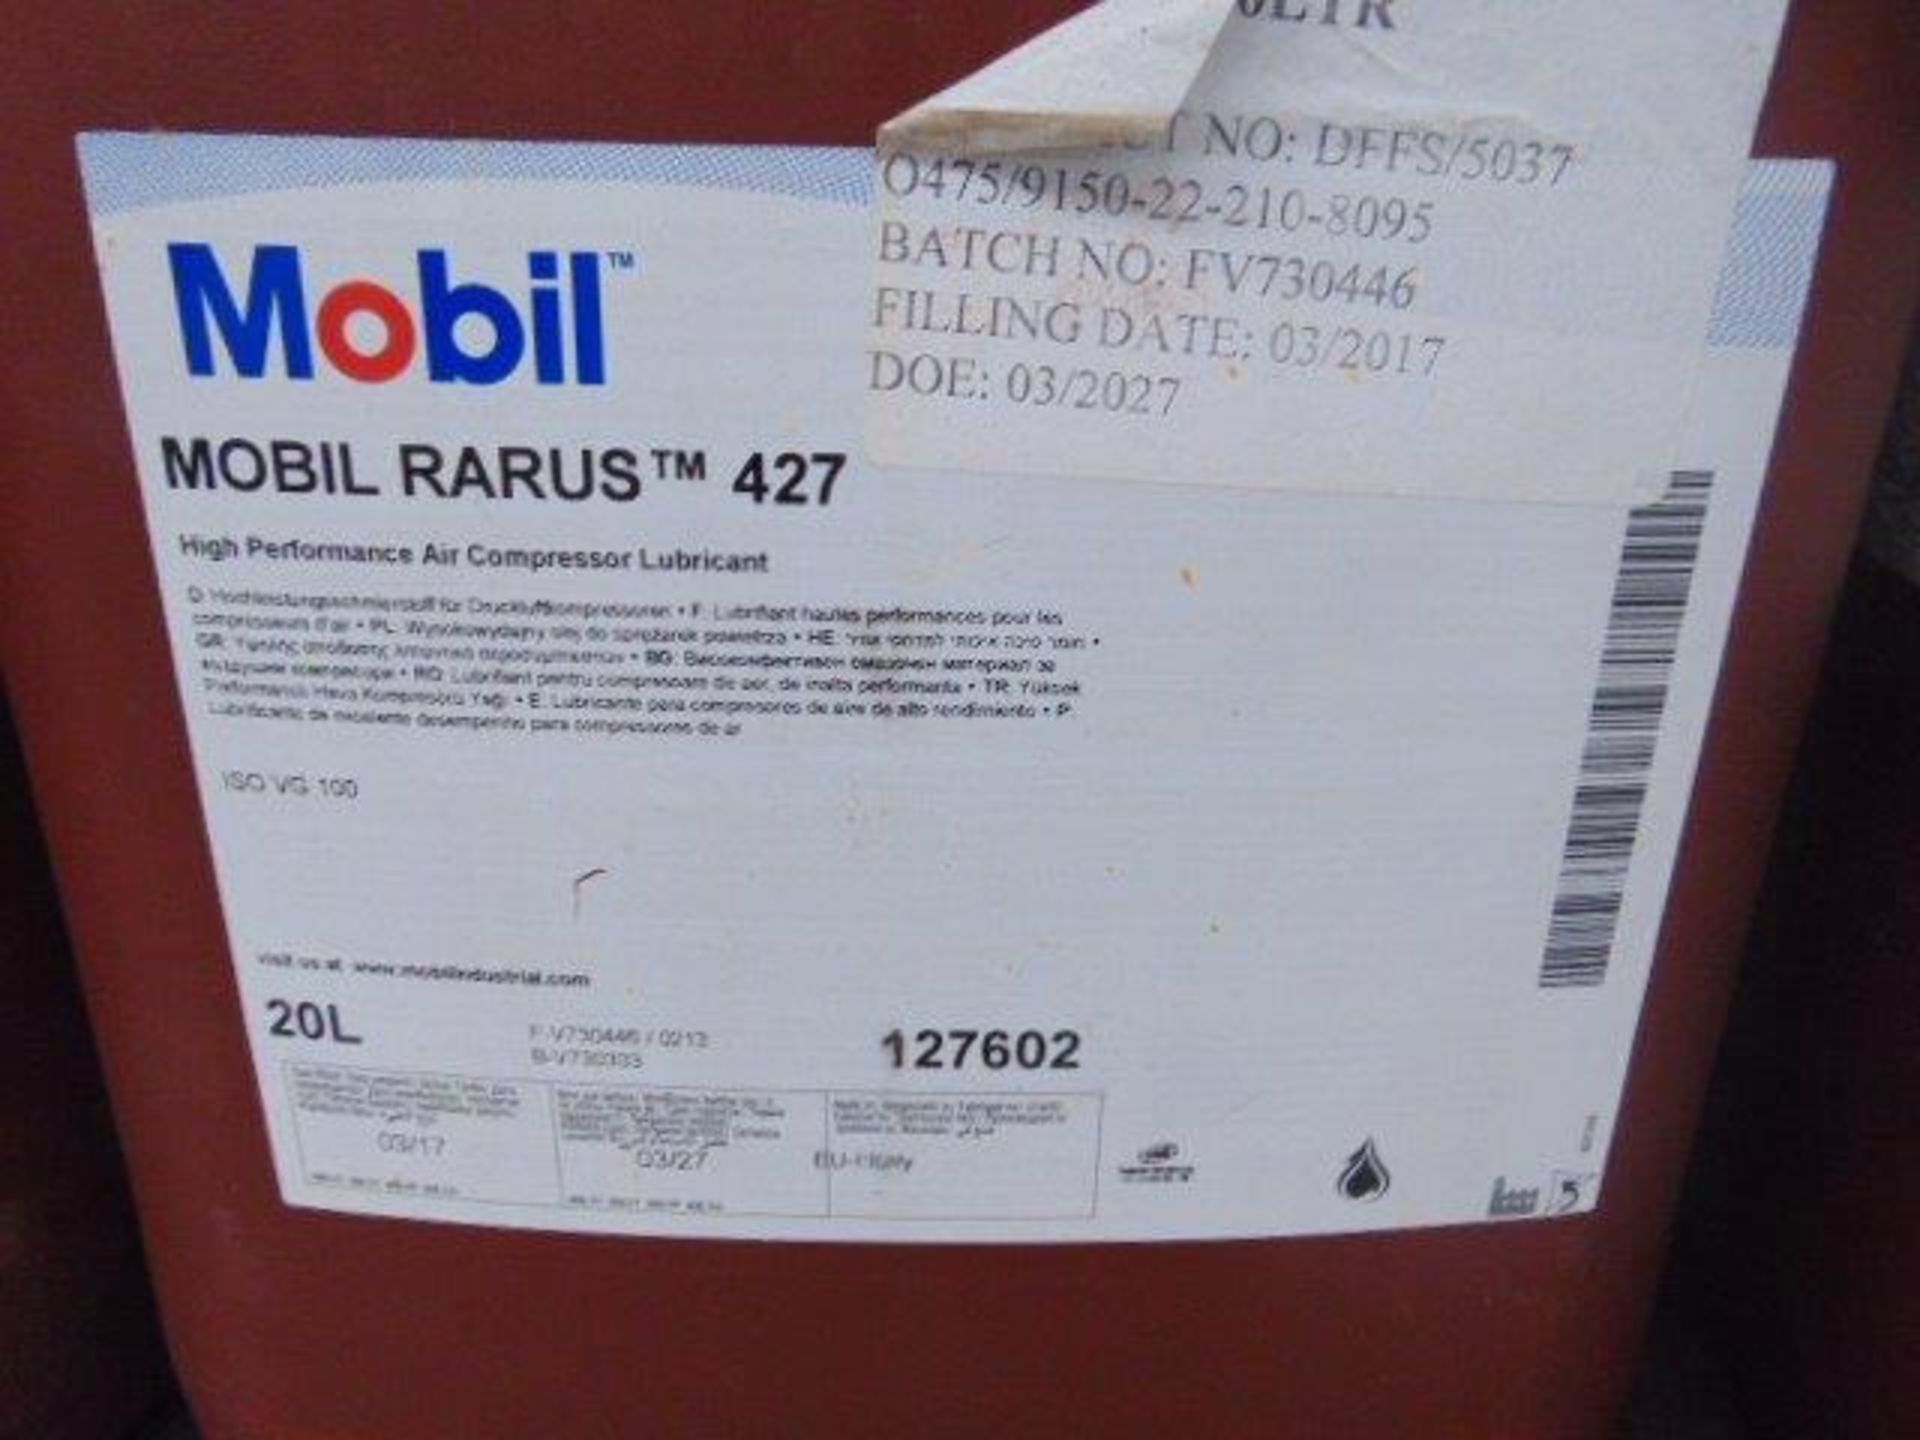 15 x Unissued 20L Drums of Mobil Rarus 427 Air Compressor Lubricant / Oil - Image 3 of 4